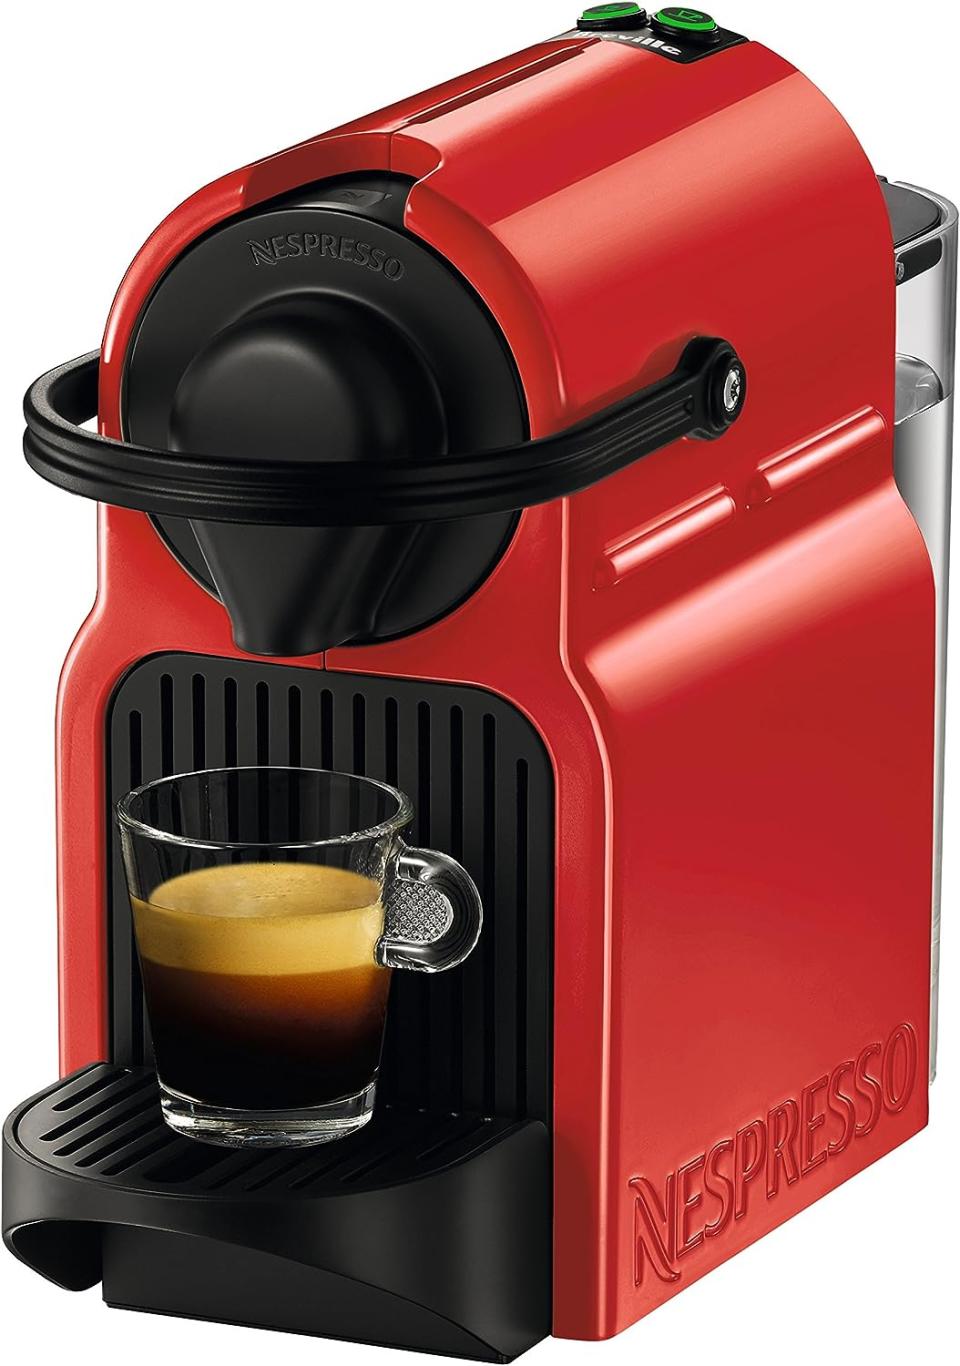 the nespresso machine with a cup of coffee on it